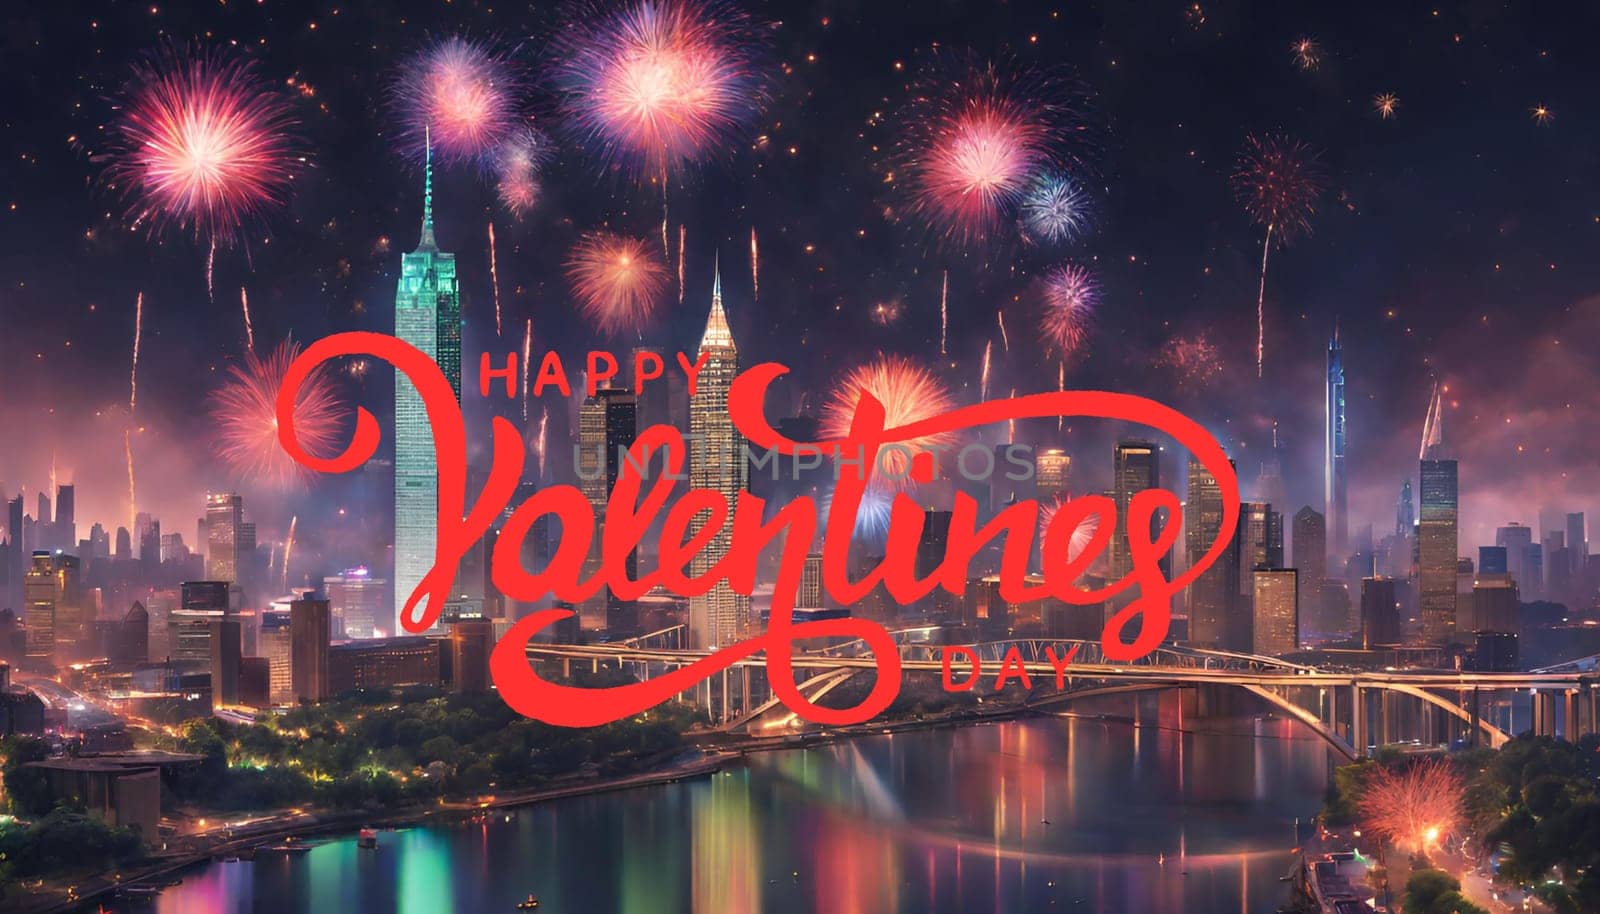 valentine's day. A city skyline at night with colorful lights and fireworks. The buildings are tall and modern, and the sky is dark and starry. by Designlab